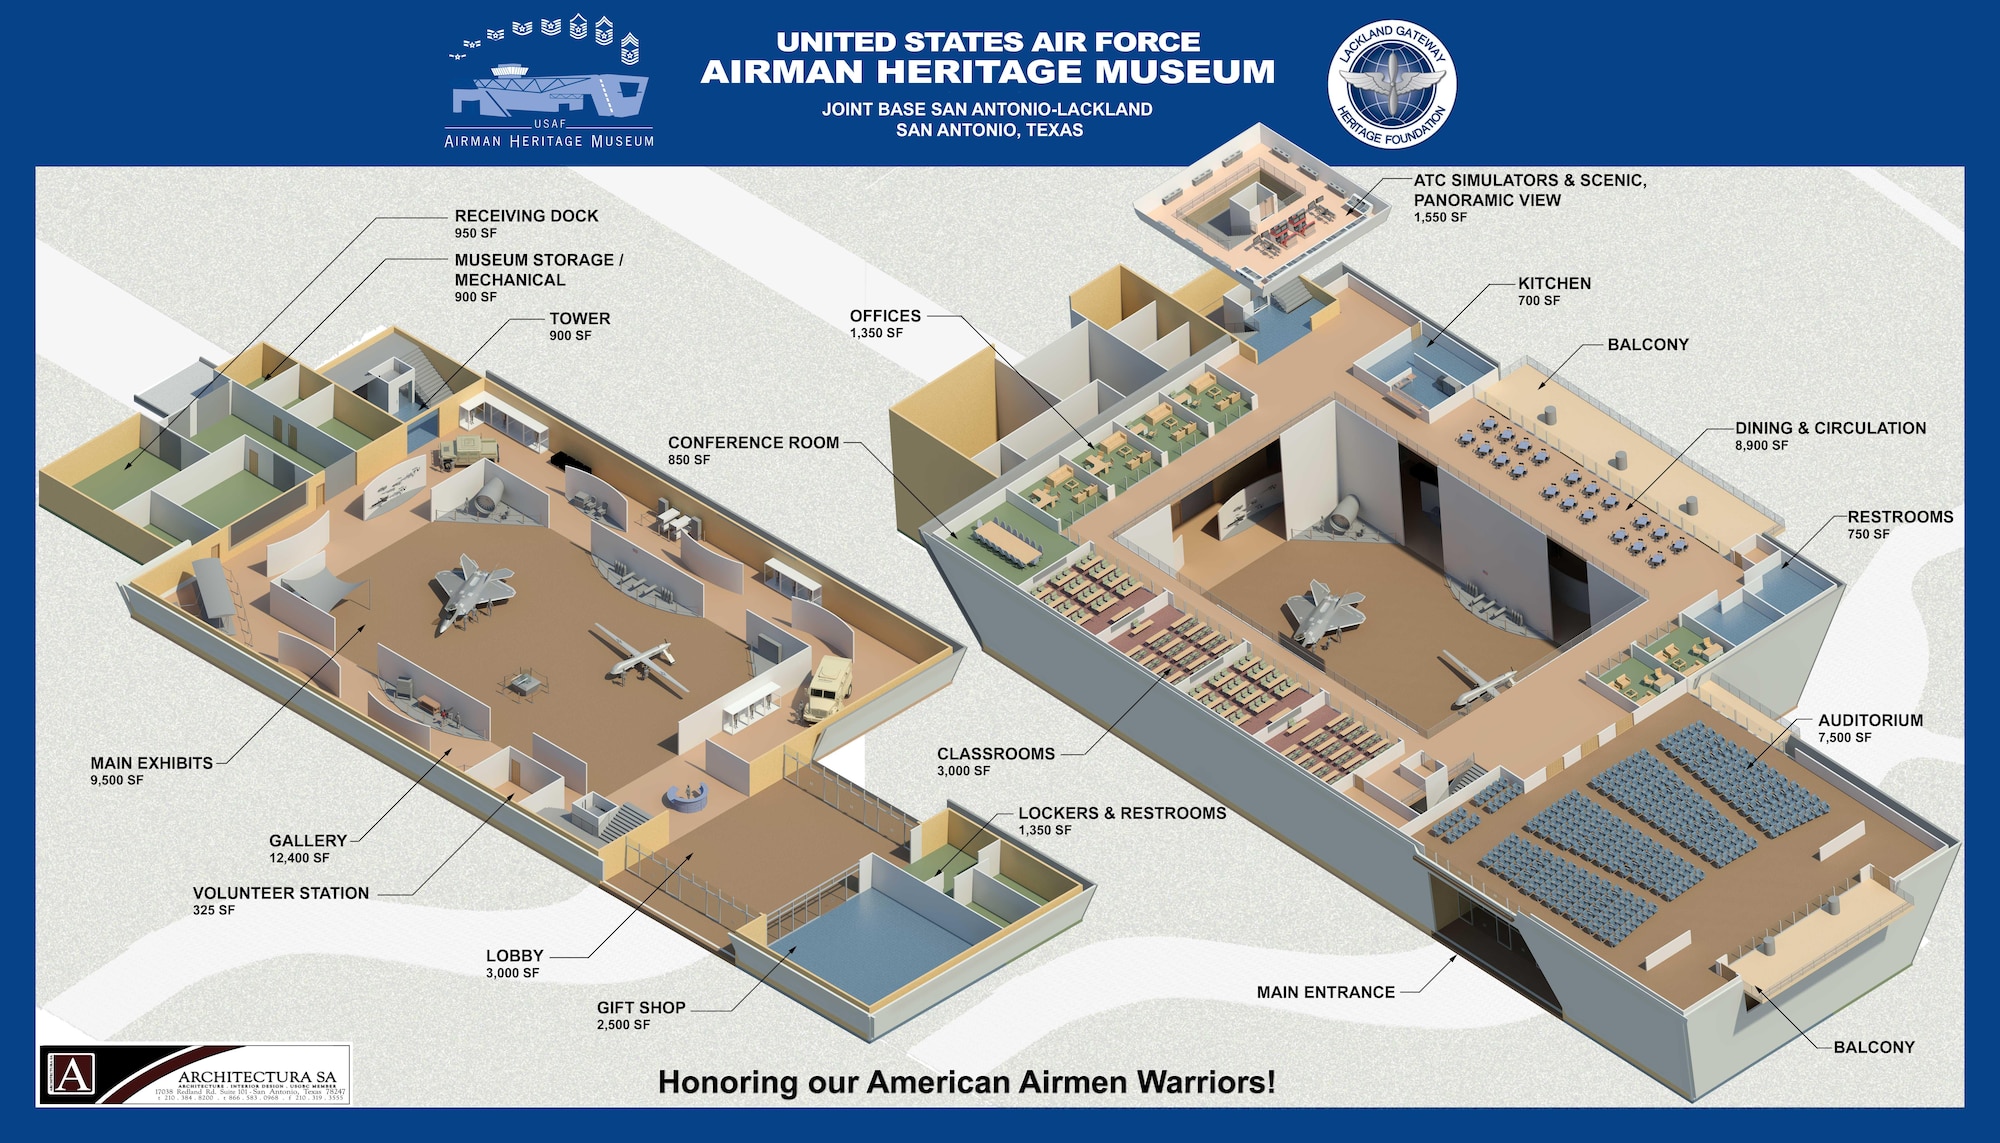 Plans for the future Airman Heritage Museum